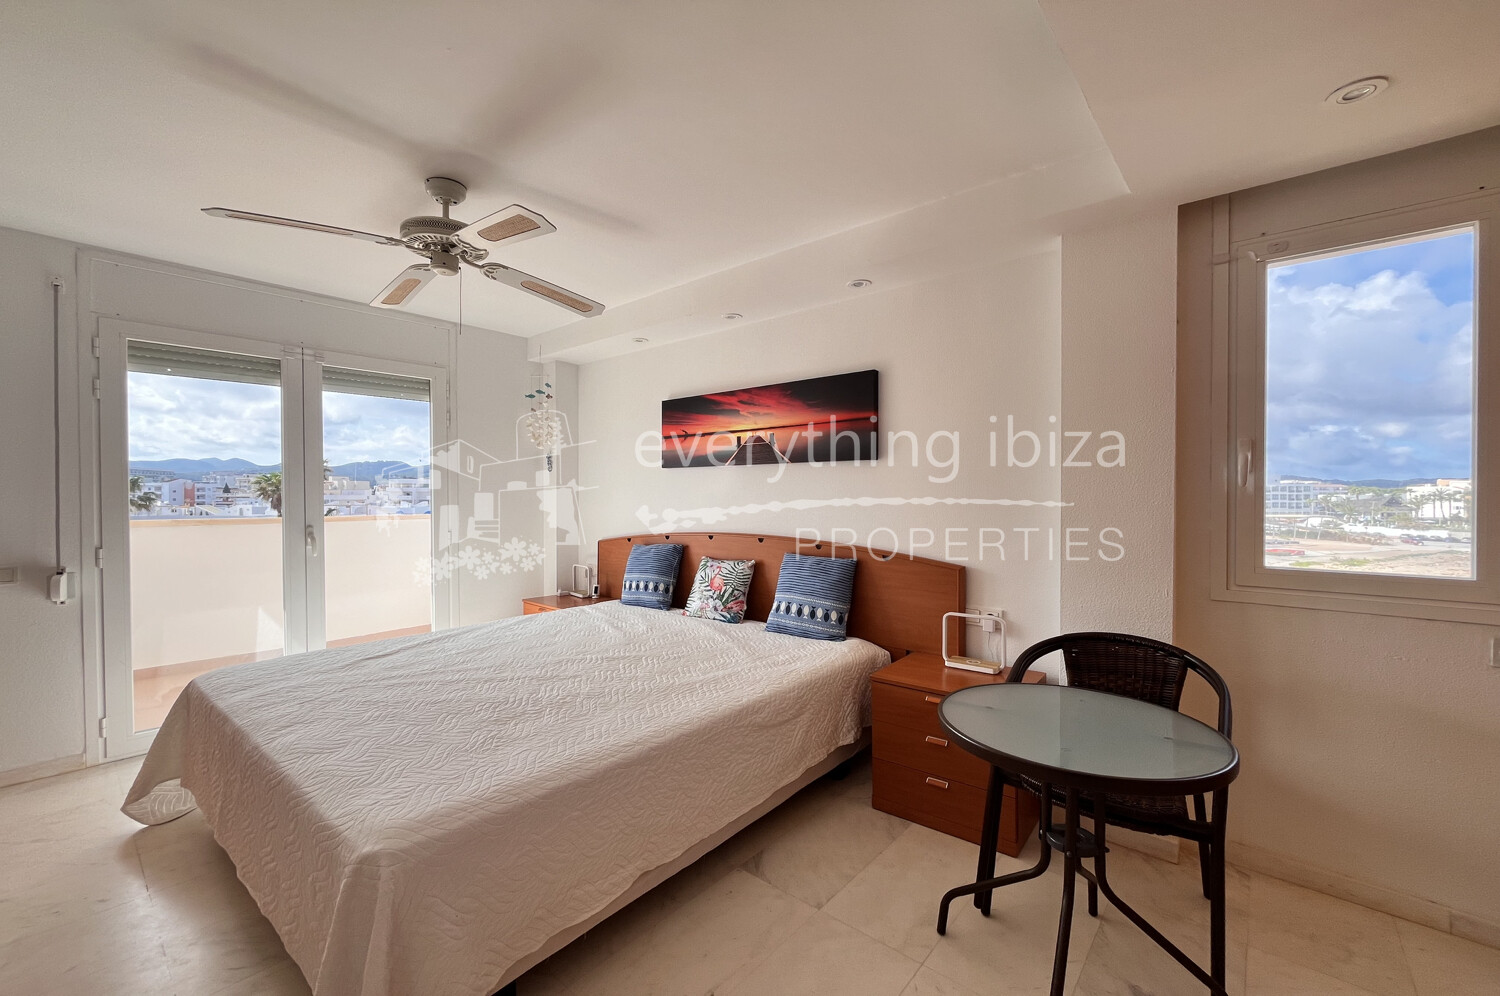 Coastline Penthouse Apartment with Large Roof Terrace, Sea and Sunset Views, ref. 1696, for sale in Ibiza by everything ibiza Properties